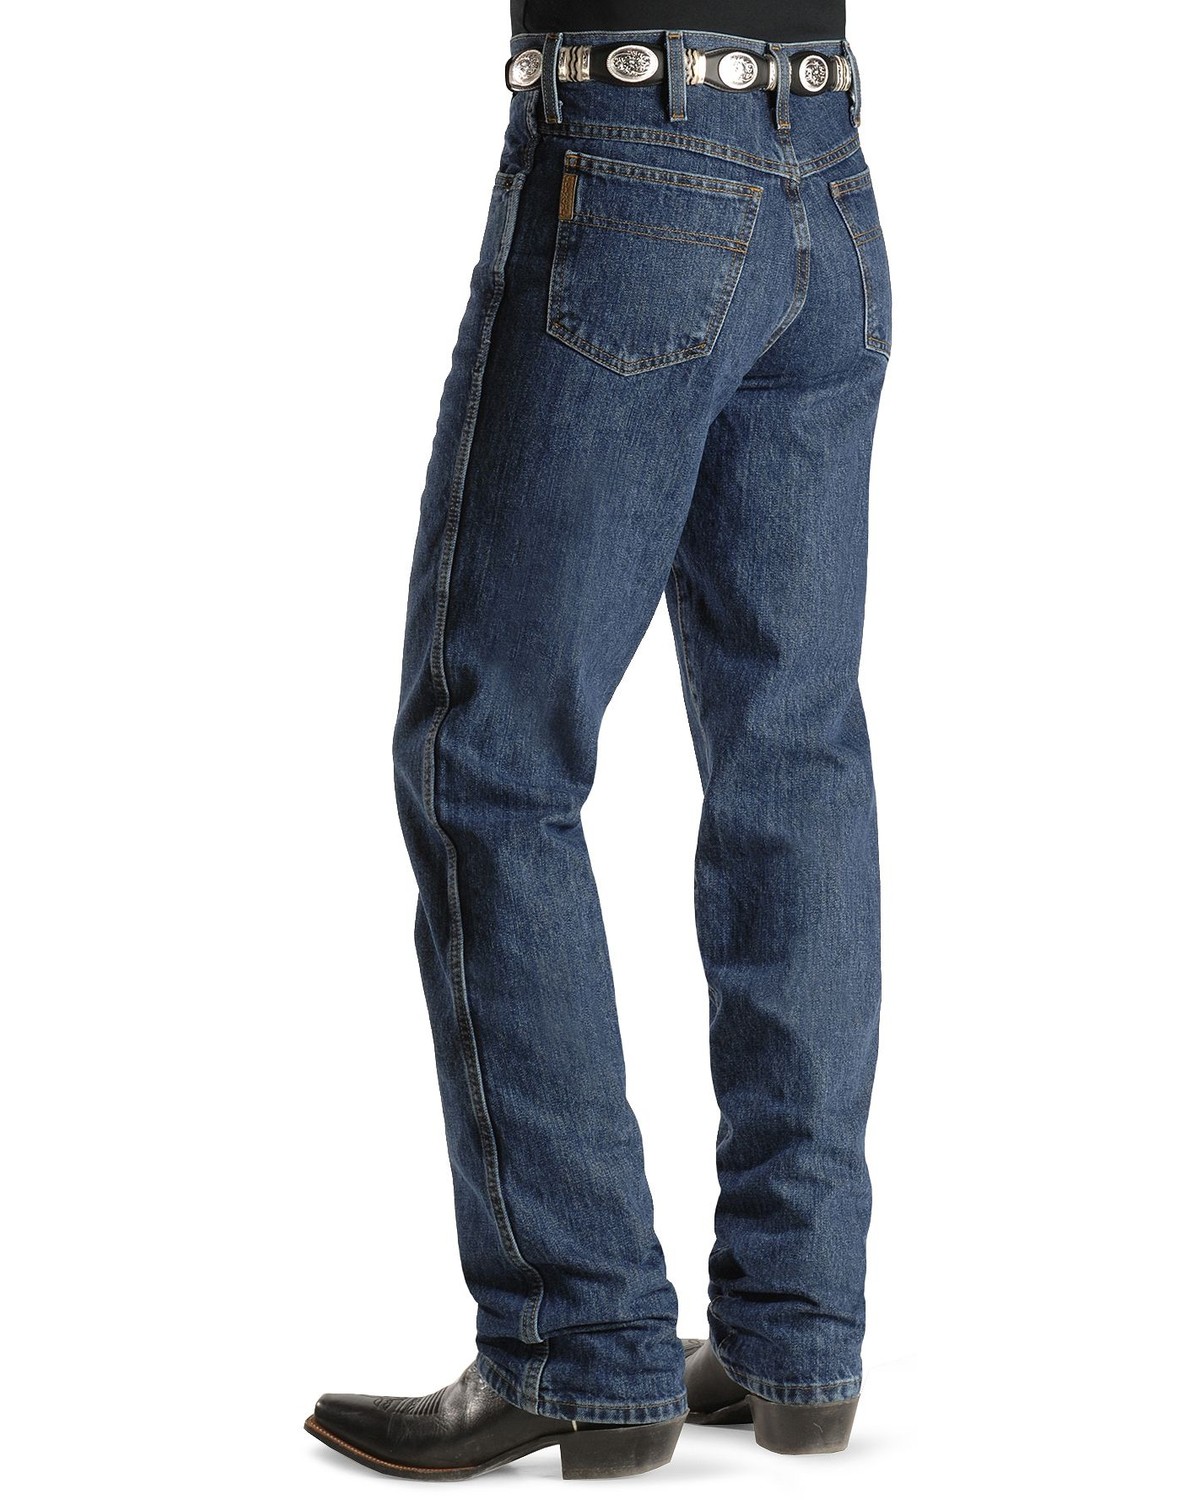 cinch jeans clearance